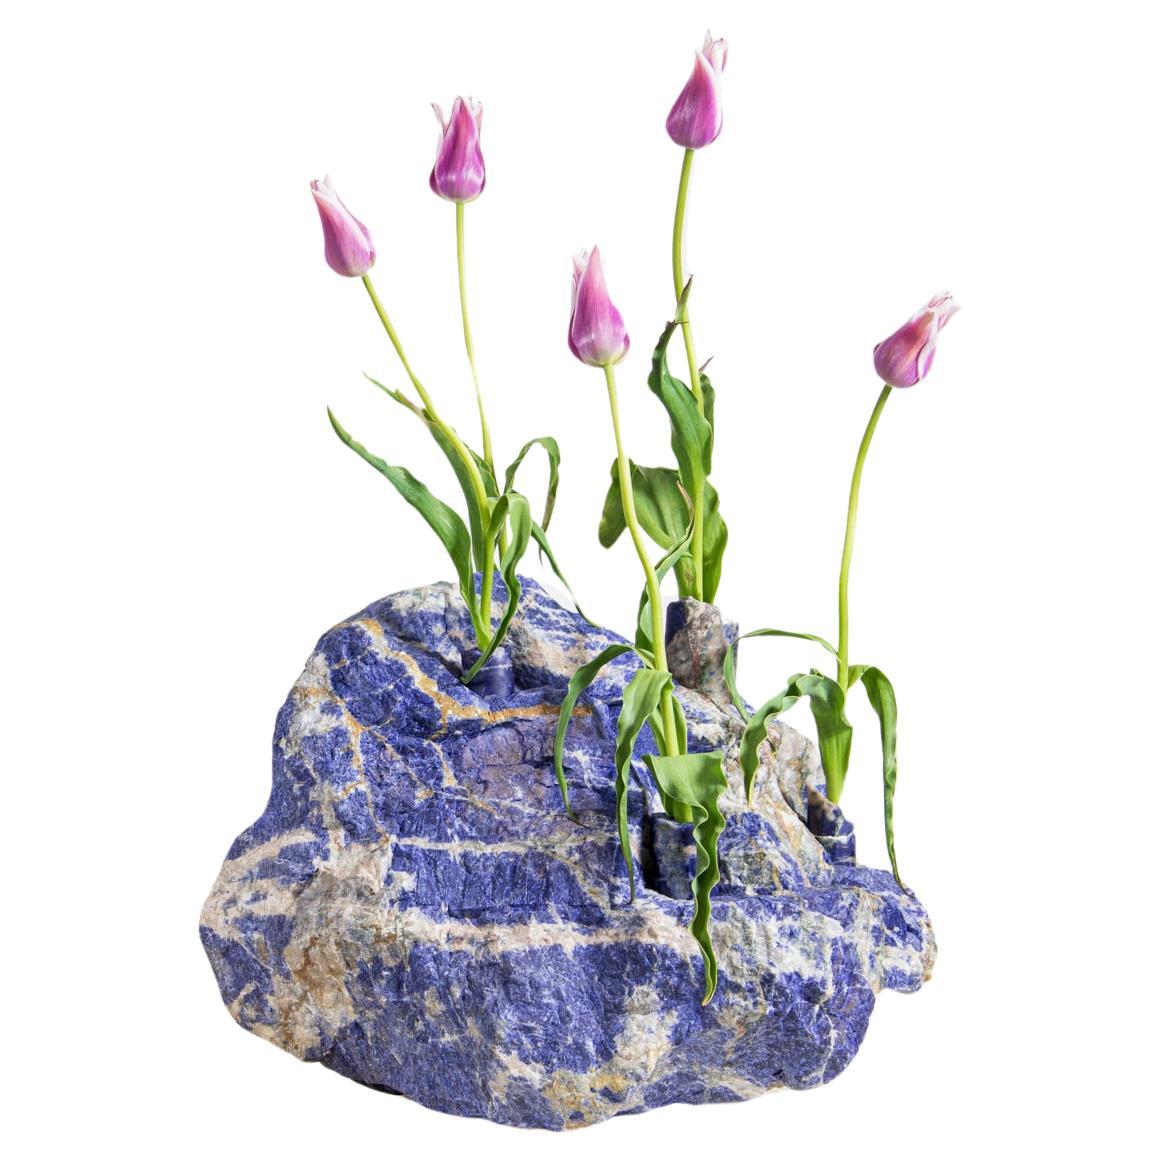 What kind of vase is best for tulips?